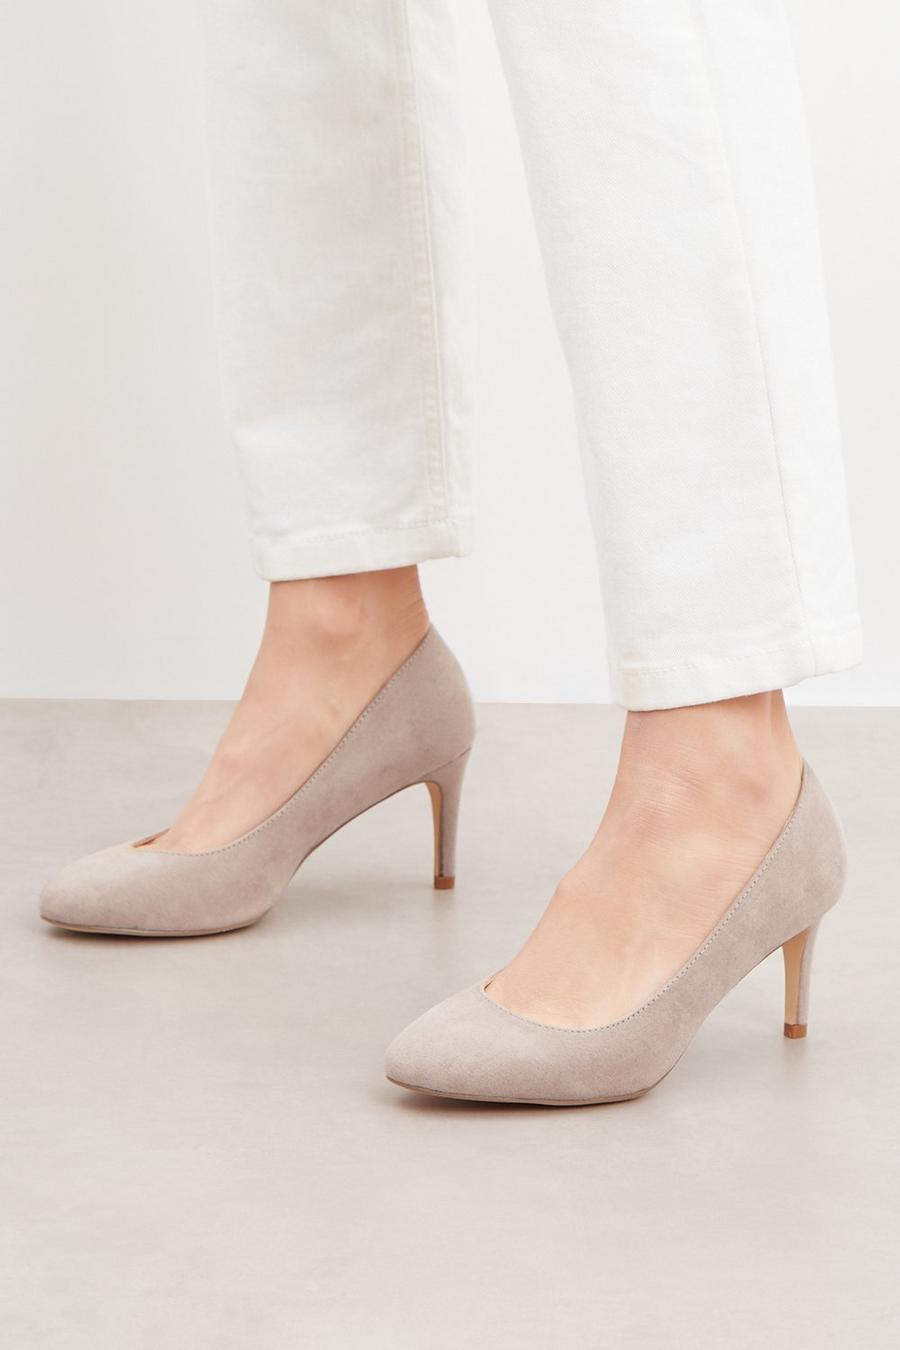 Good For The Sole: Angela Almond Toe Court Shoe